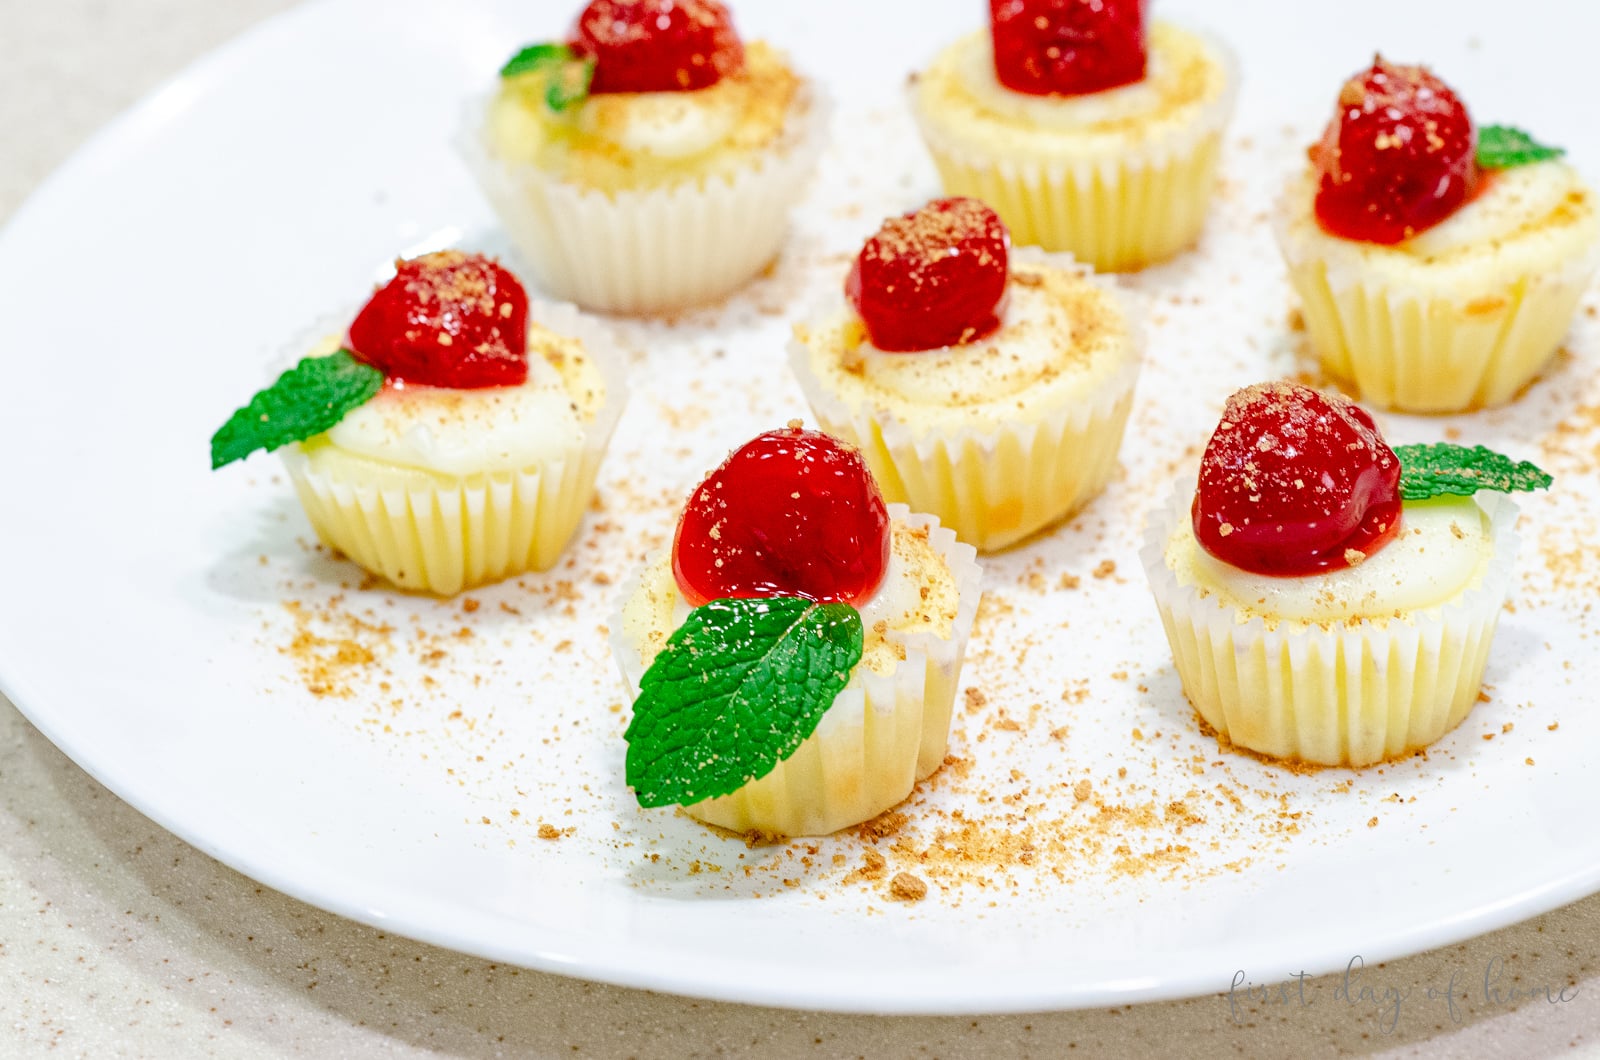 Mini cheesecakes on a plate with cherry topping and mint leaves